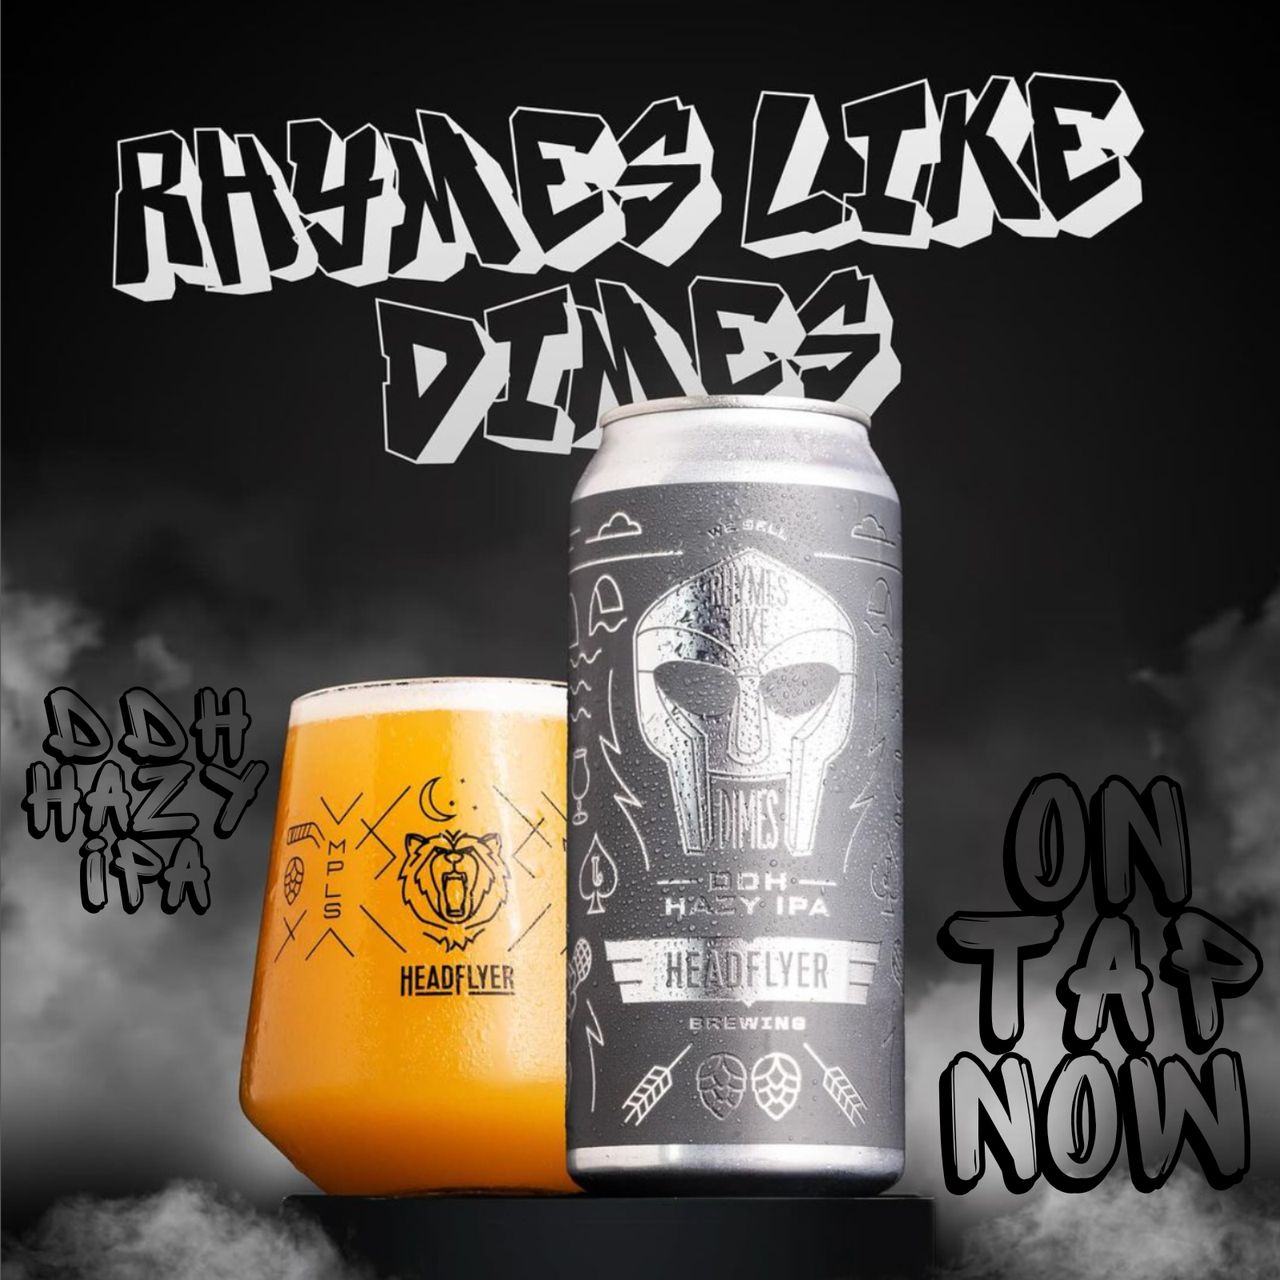 Rhymes Like Dimes - DDH Hazy IPA - Available Now